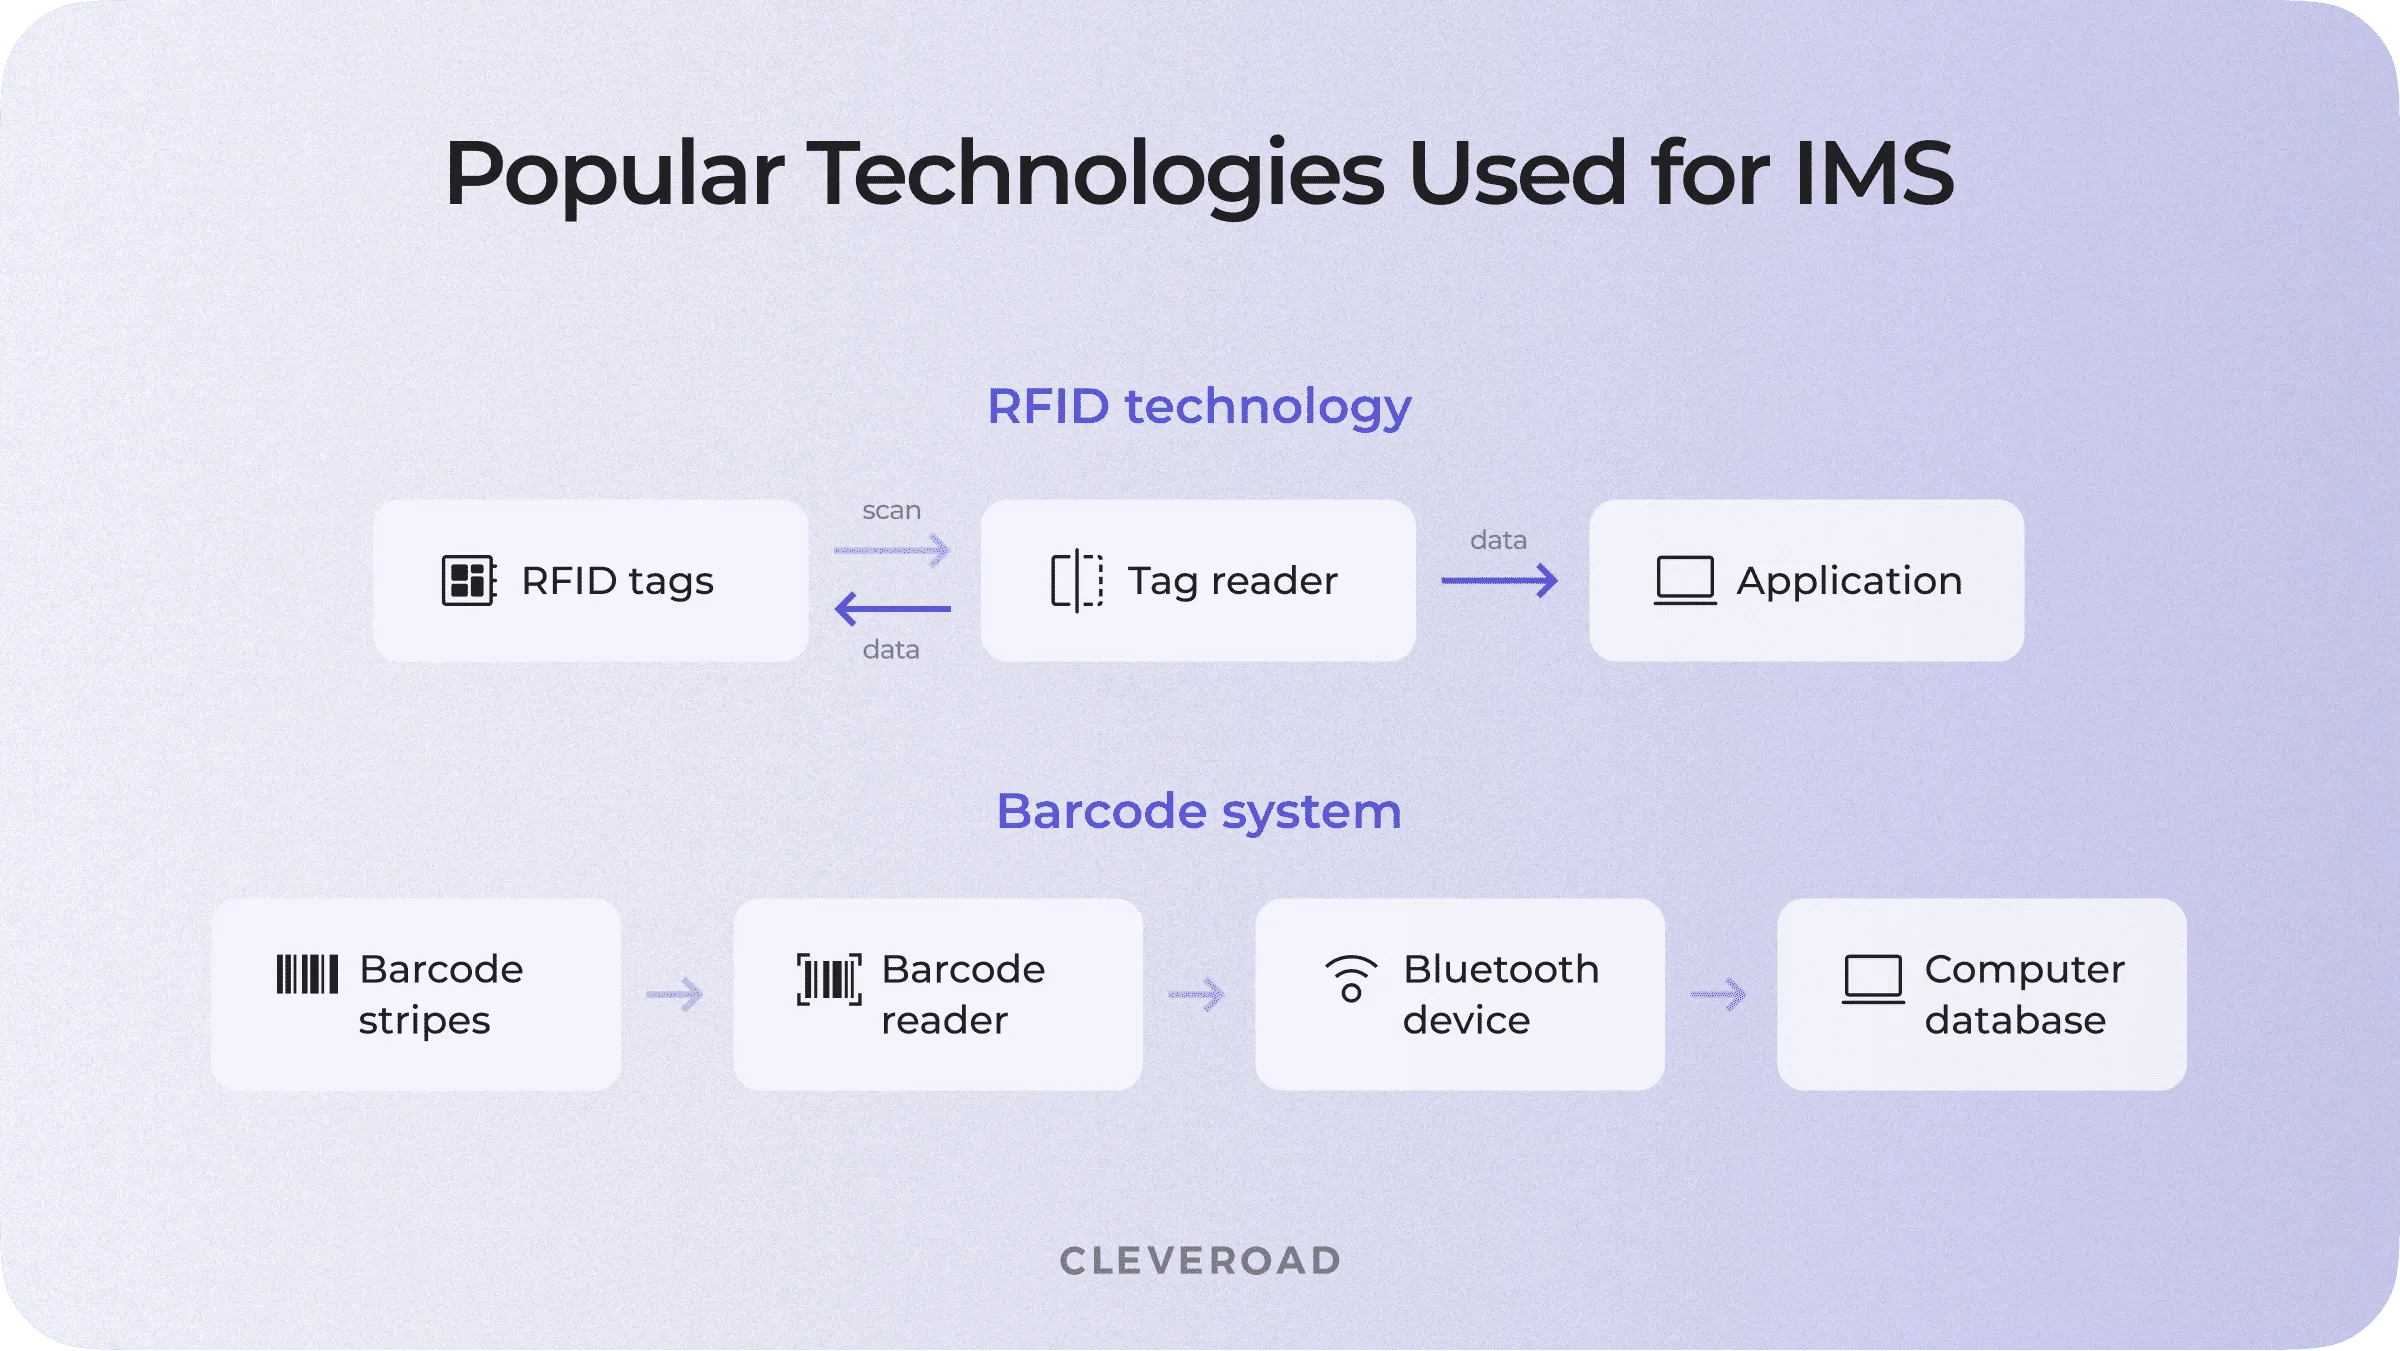 Technologies used for IMS